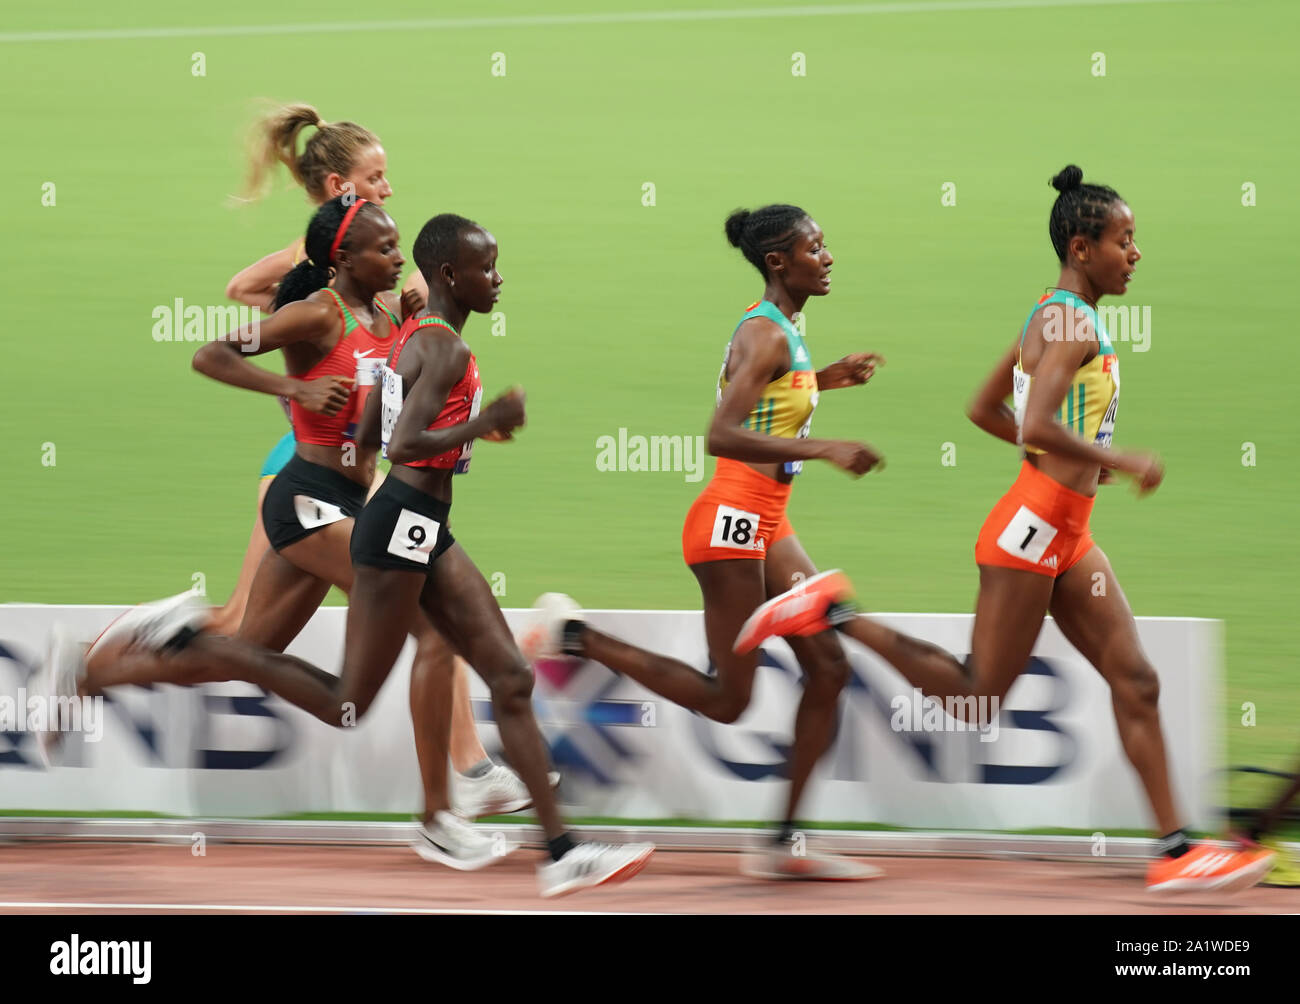 Doha, Qatar. 28th Sep, 2019. Athletes compete during the women's 10,000m final at the 2019 IAAF World Championships in Doha, Qatar, Sept. 28, 2019. Credit: Xu Suhui/Xinhua/Alamy Live News Stock Photo